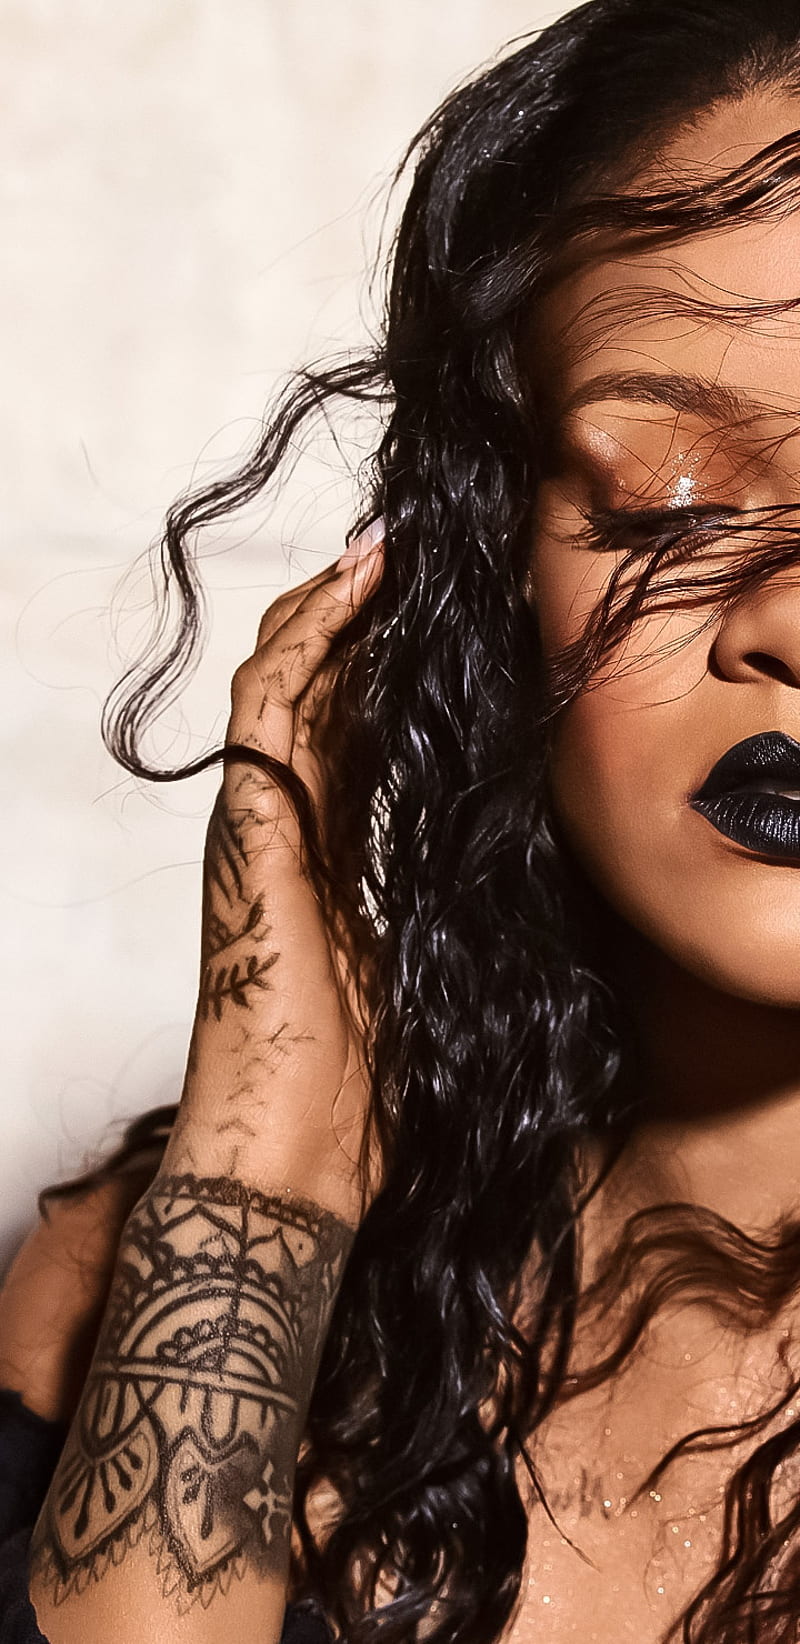 1920x1080 / 1920x1080 rihanna background hd - Coolwallpapers.me!